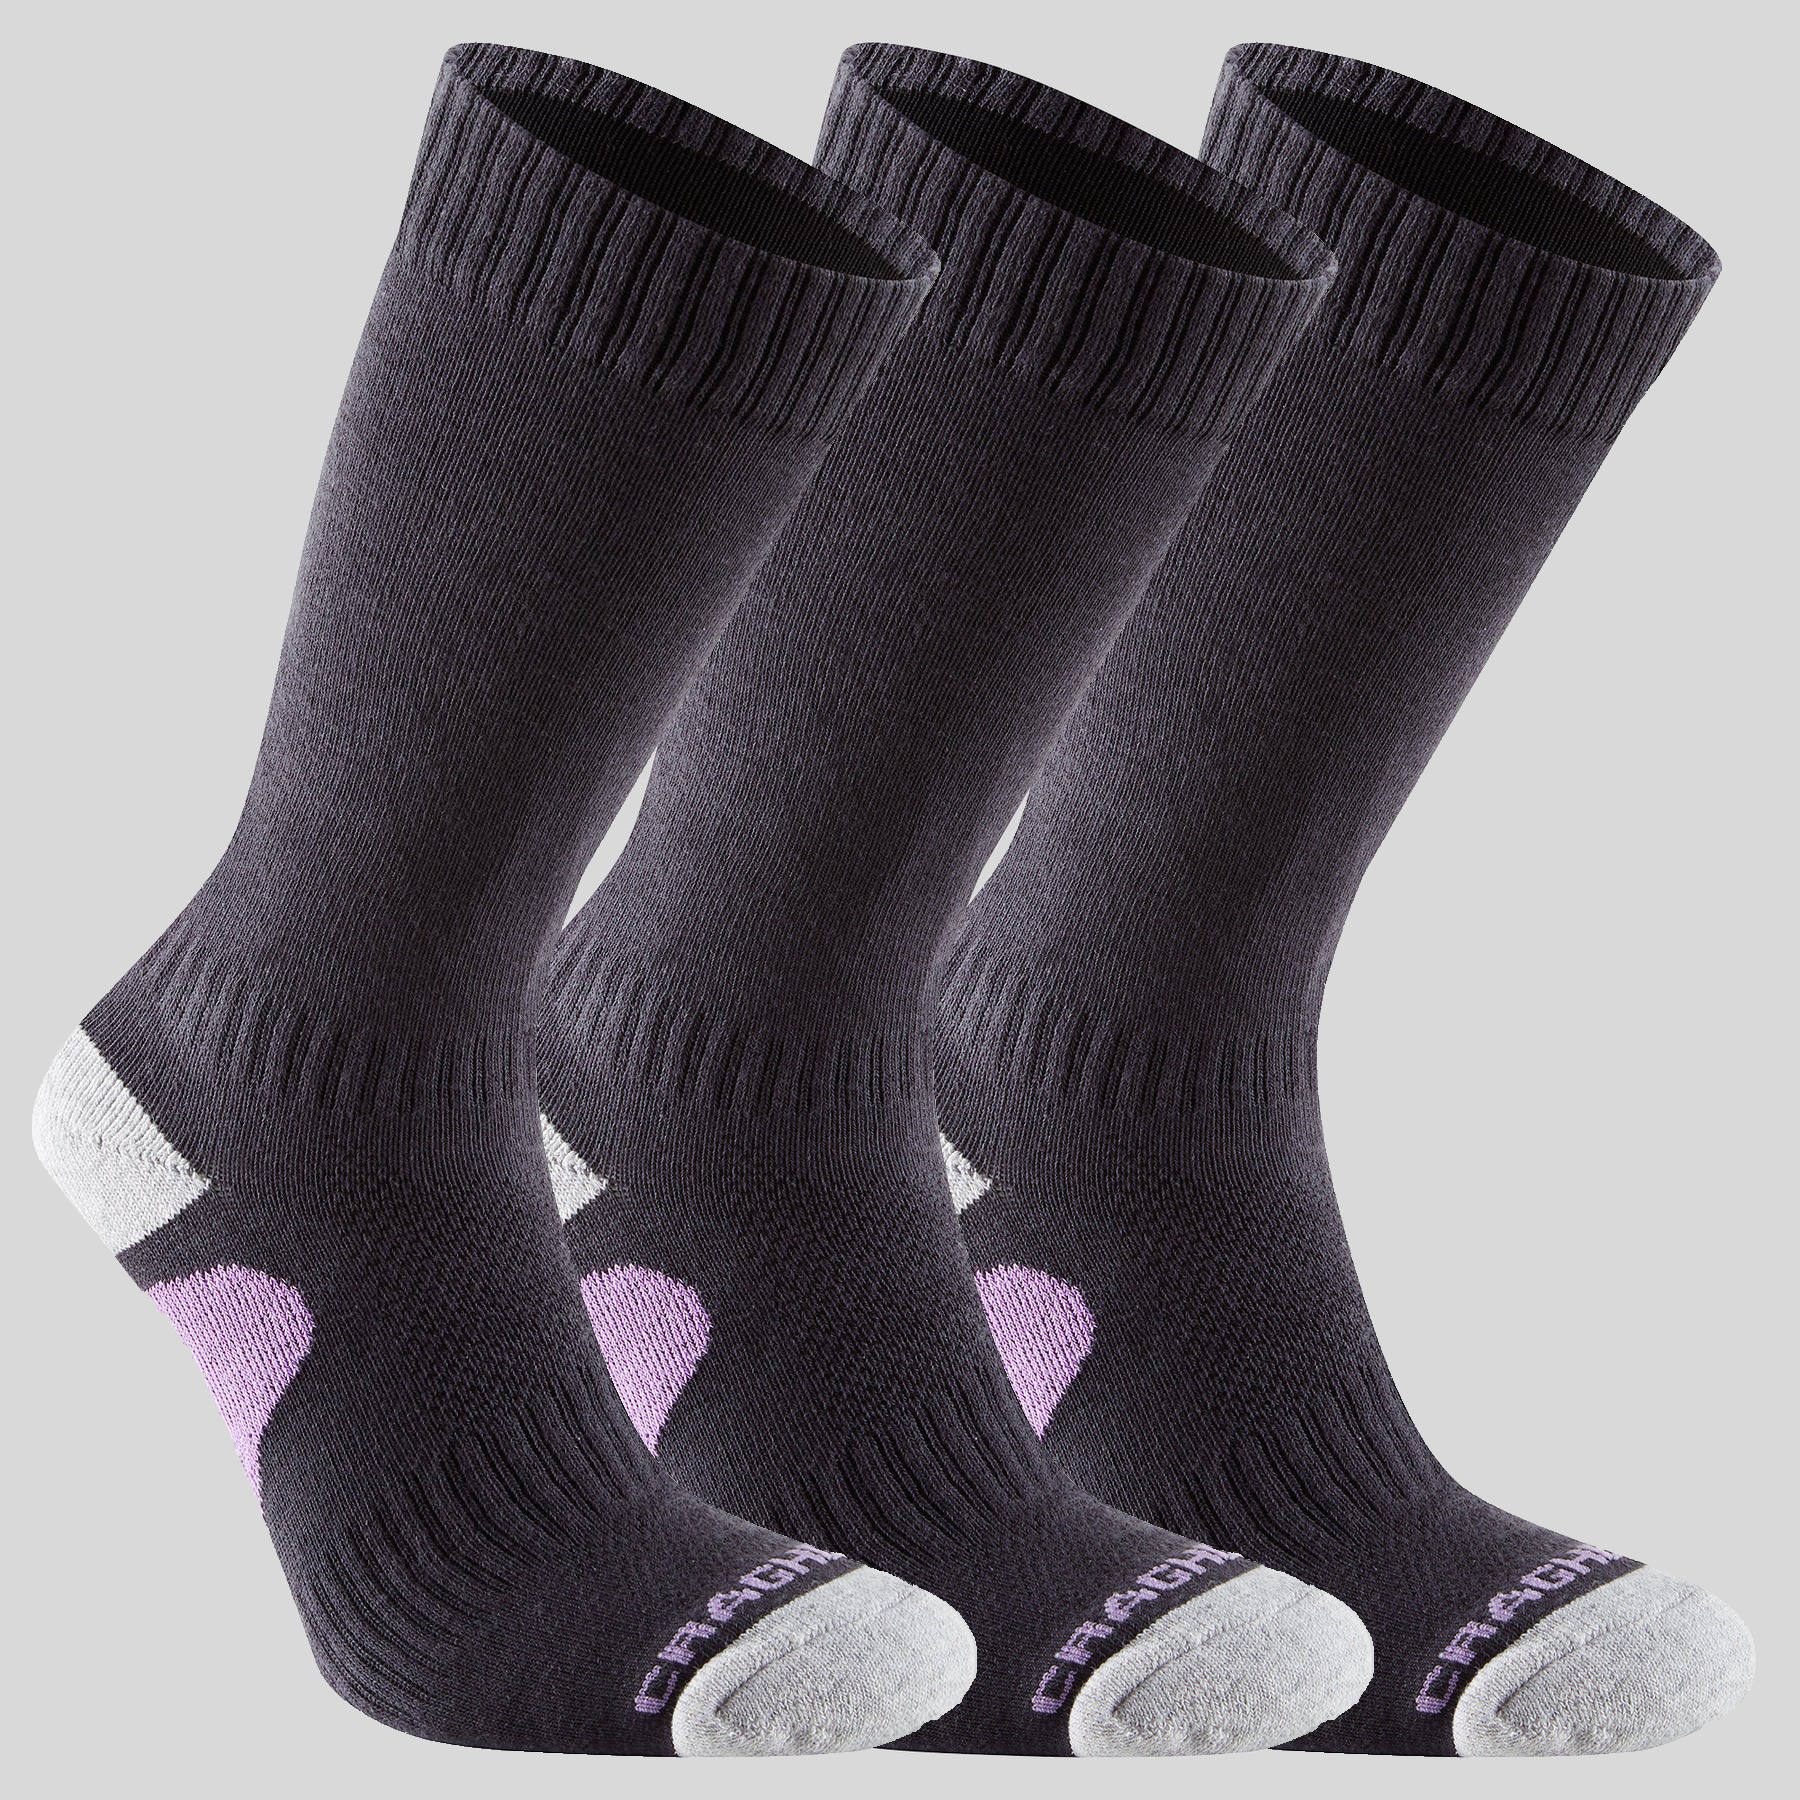 Unisex Insect Shield® Adventure Pro Socks 3-pack | Charcoal